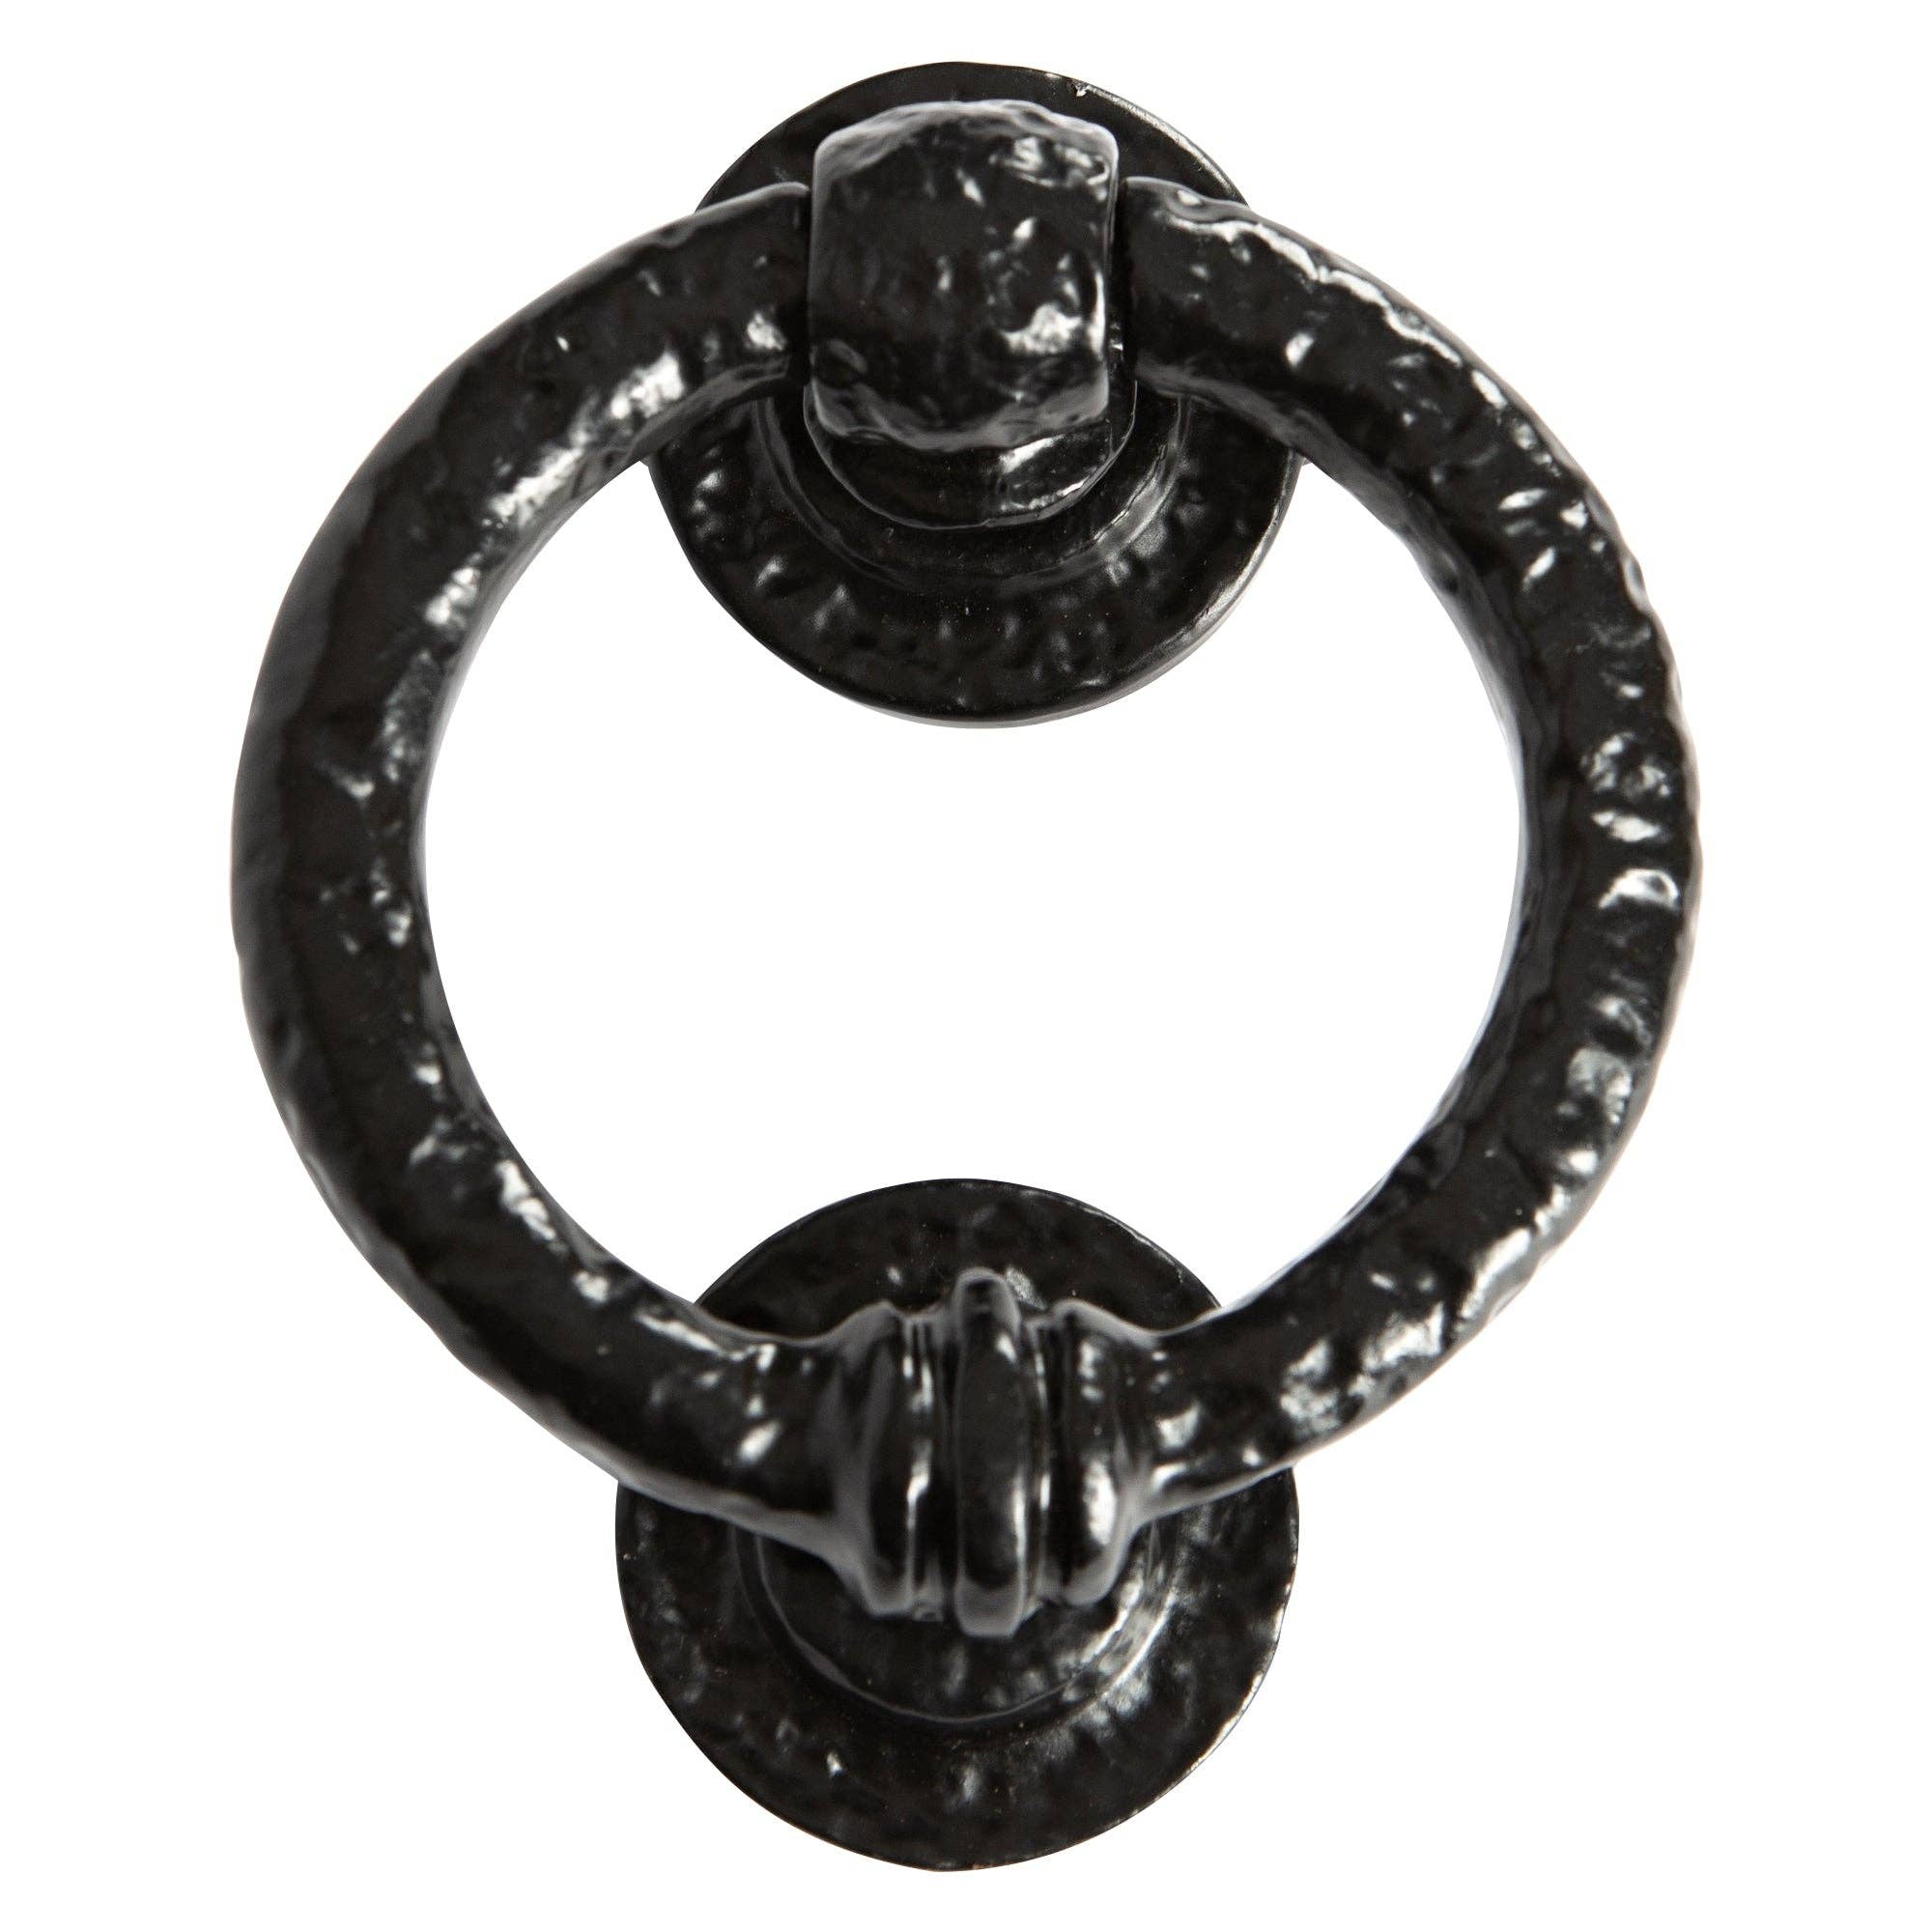 Ring Door Knocker Black Antique Traditional Reproduction Cast Iron UK Quality 